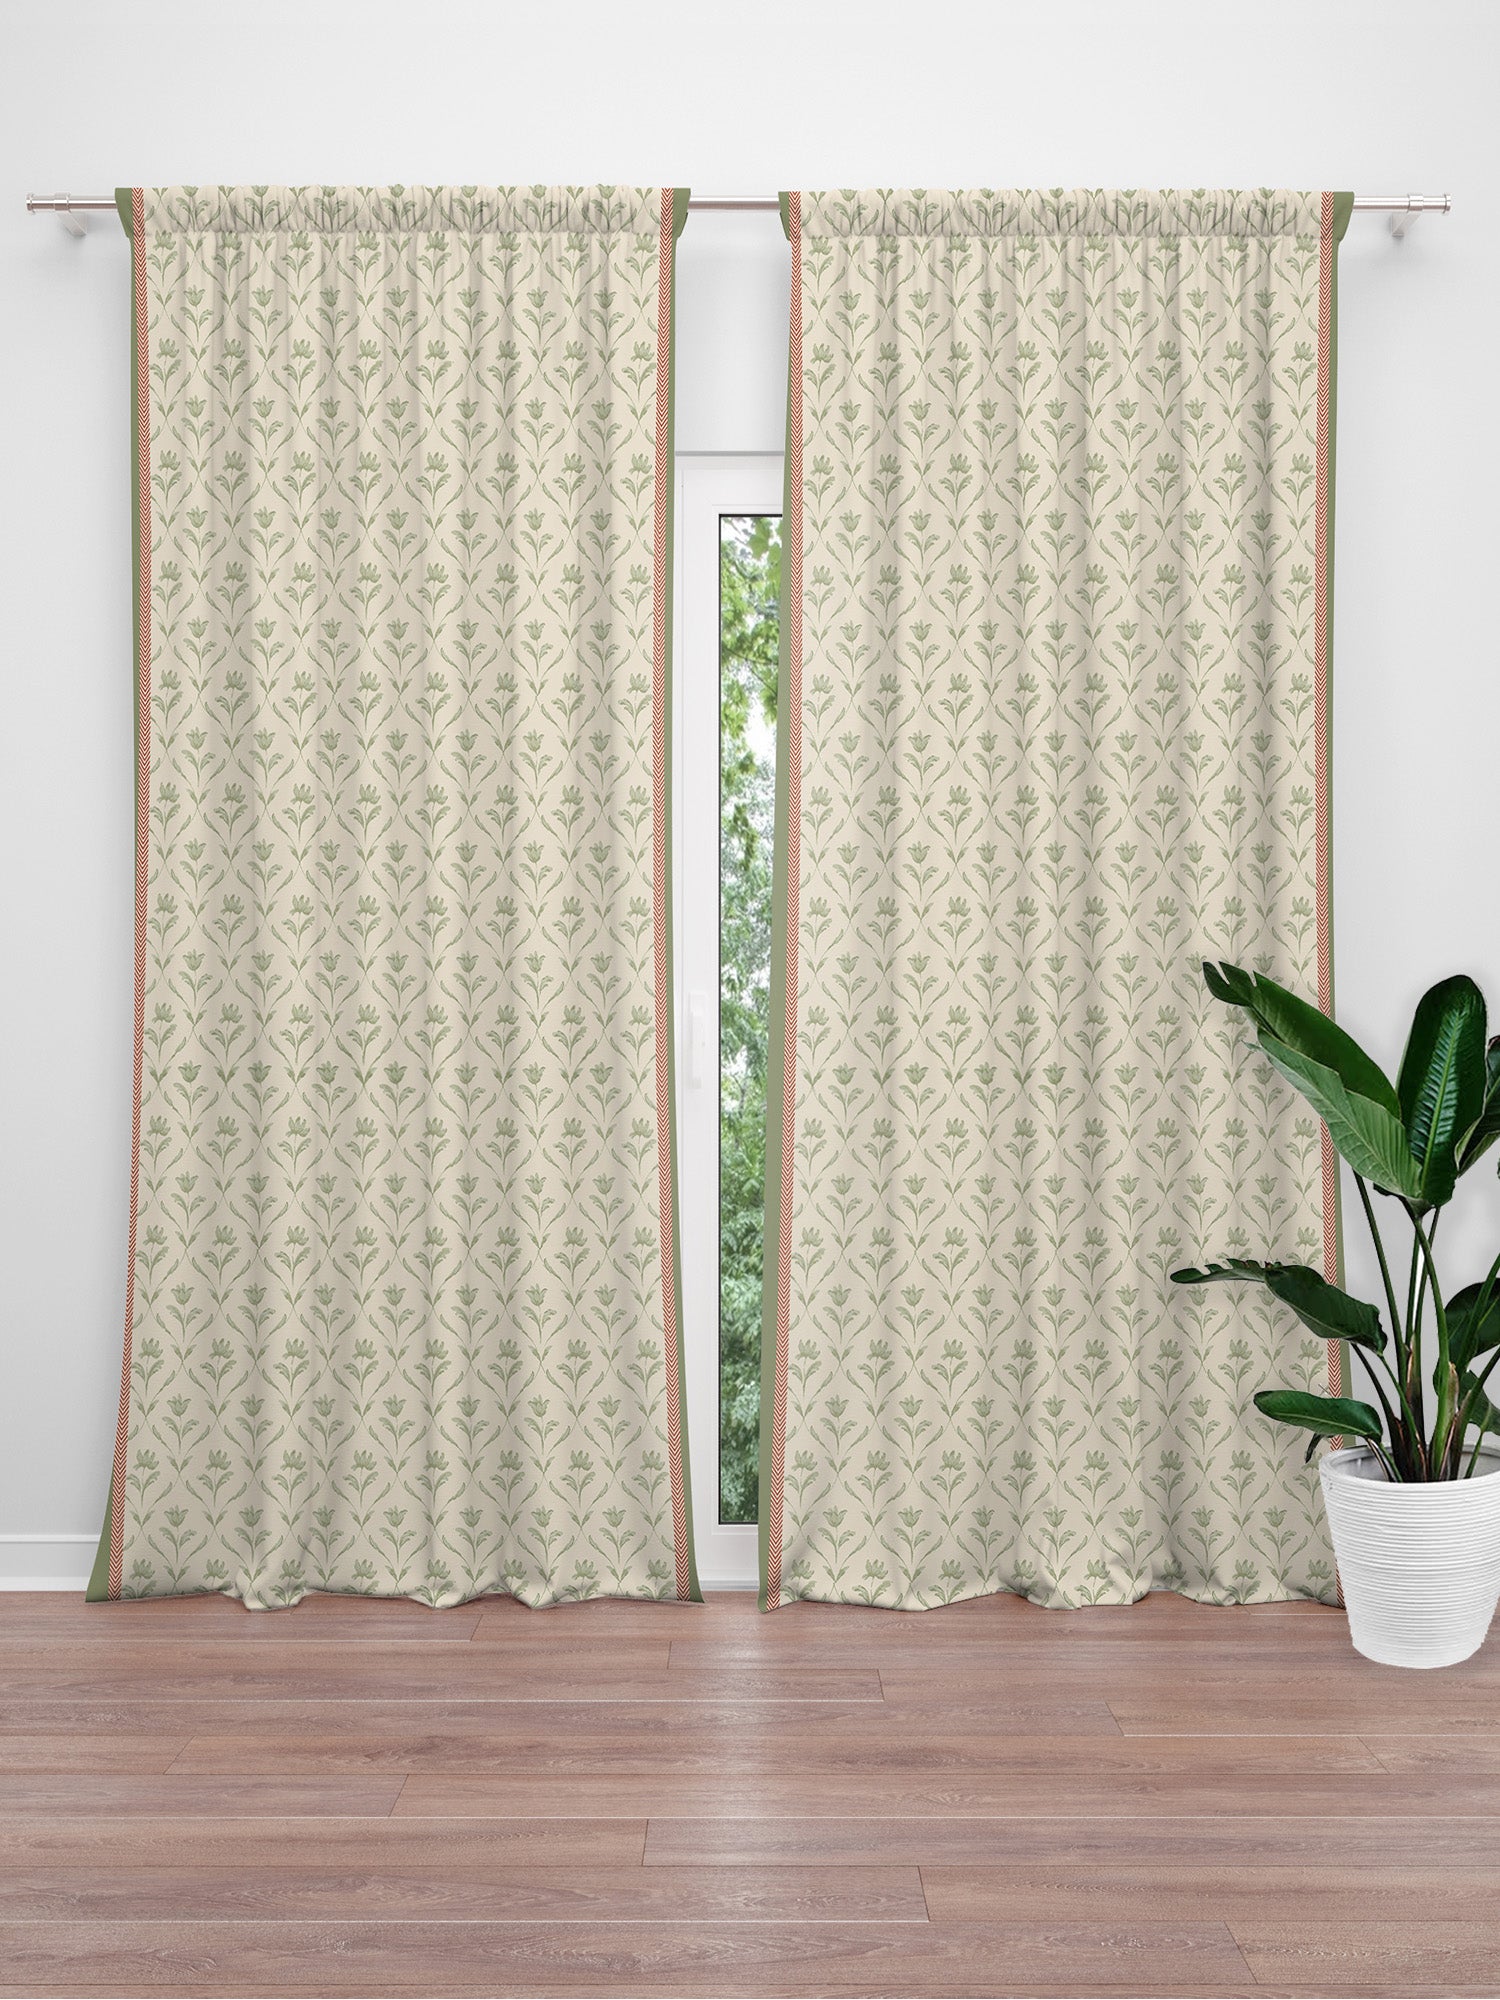 Room Darkening Blackout Door Curtain 7 Feet | Cotton Blend Curtain for Bedroom and Living Room with Hidden Loop | Floral Digital Printed in White Green Color - 50x84 inches (Pack of 2)